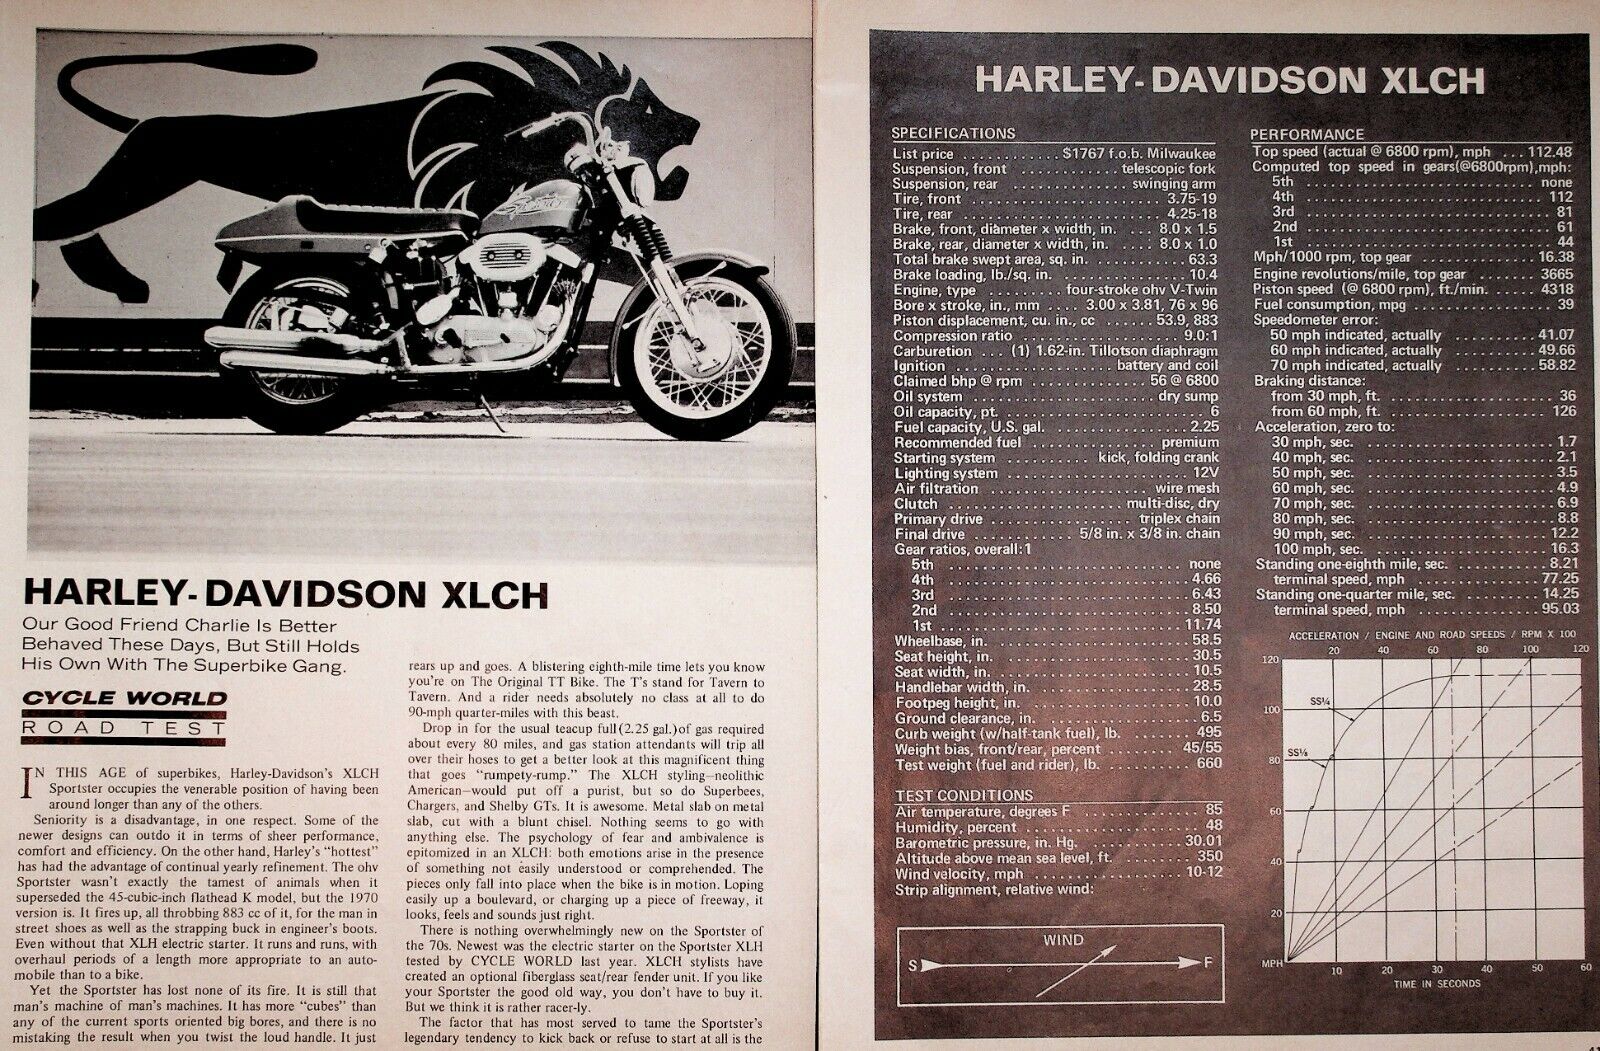 1969 Harley-Davidson XLCH Sportster -5-Page Vintage Motorcycle Road Test Article